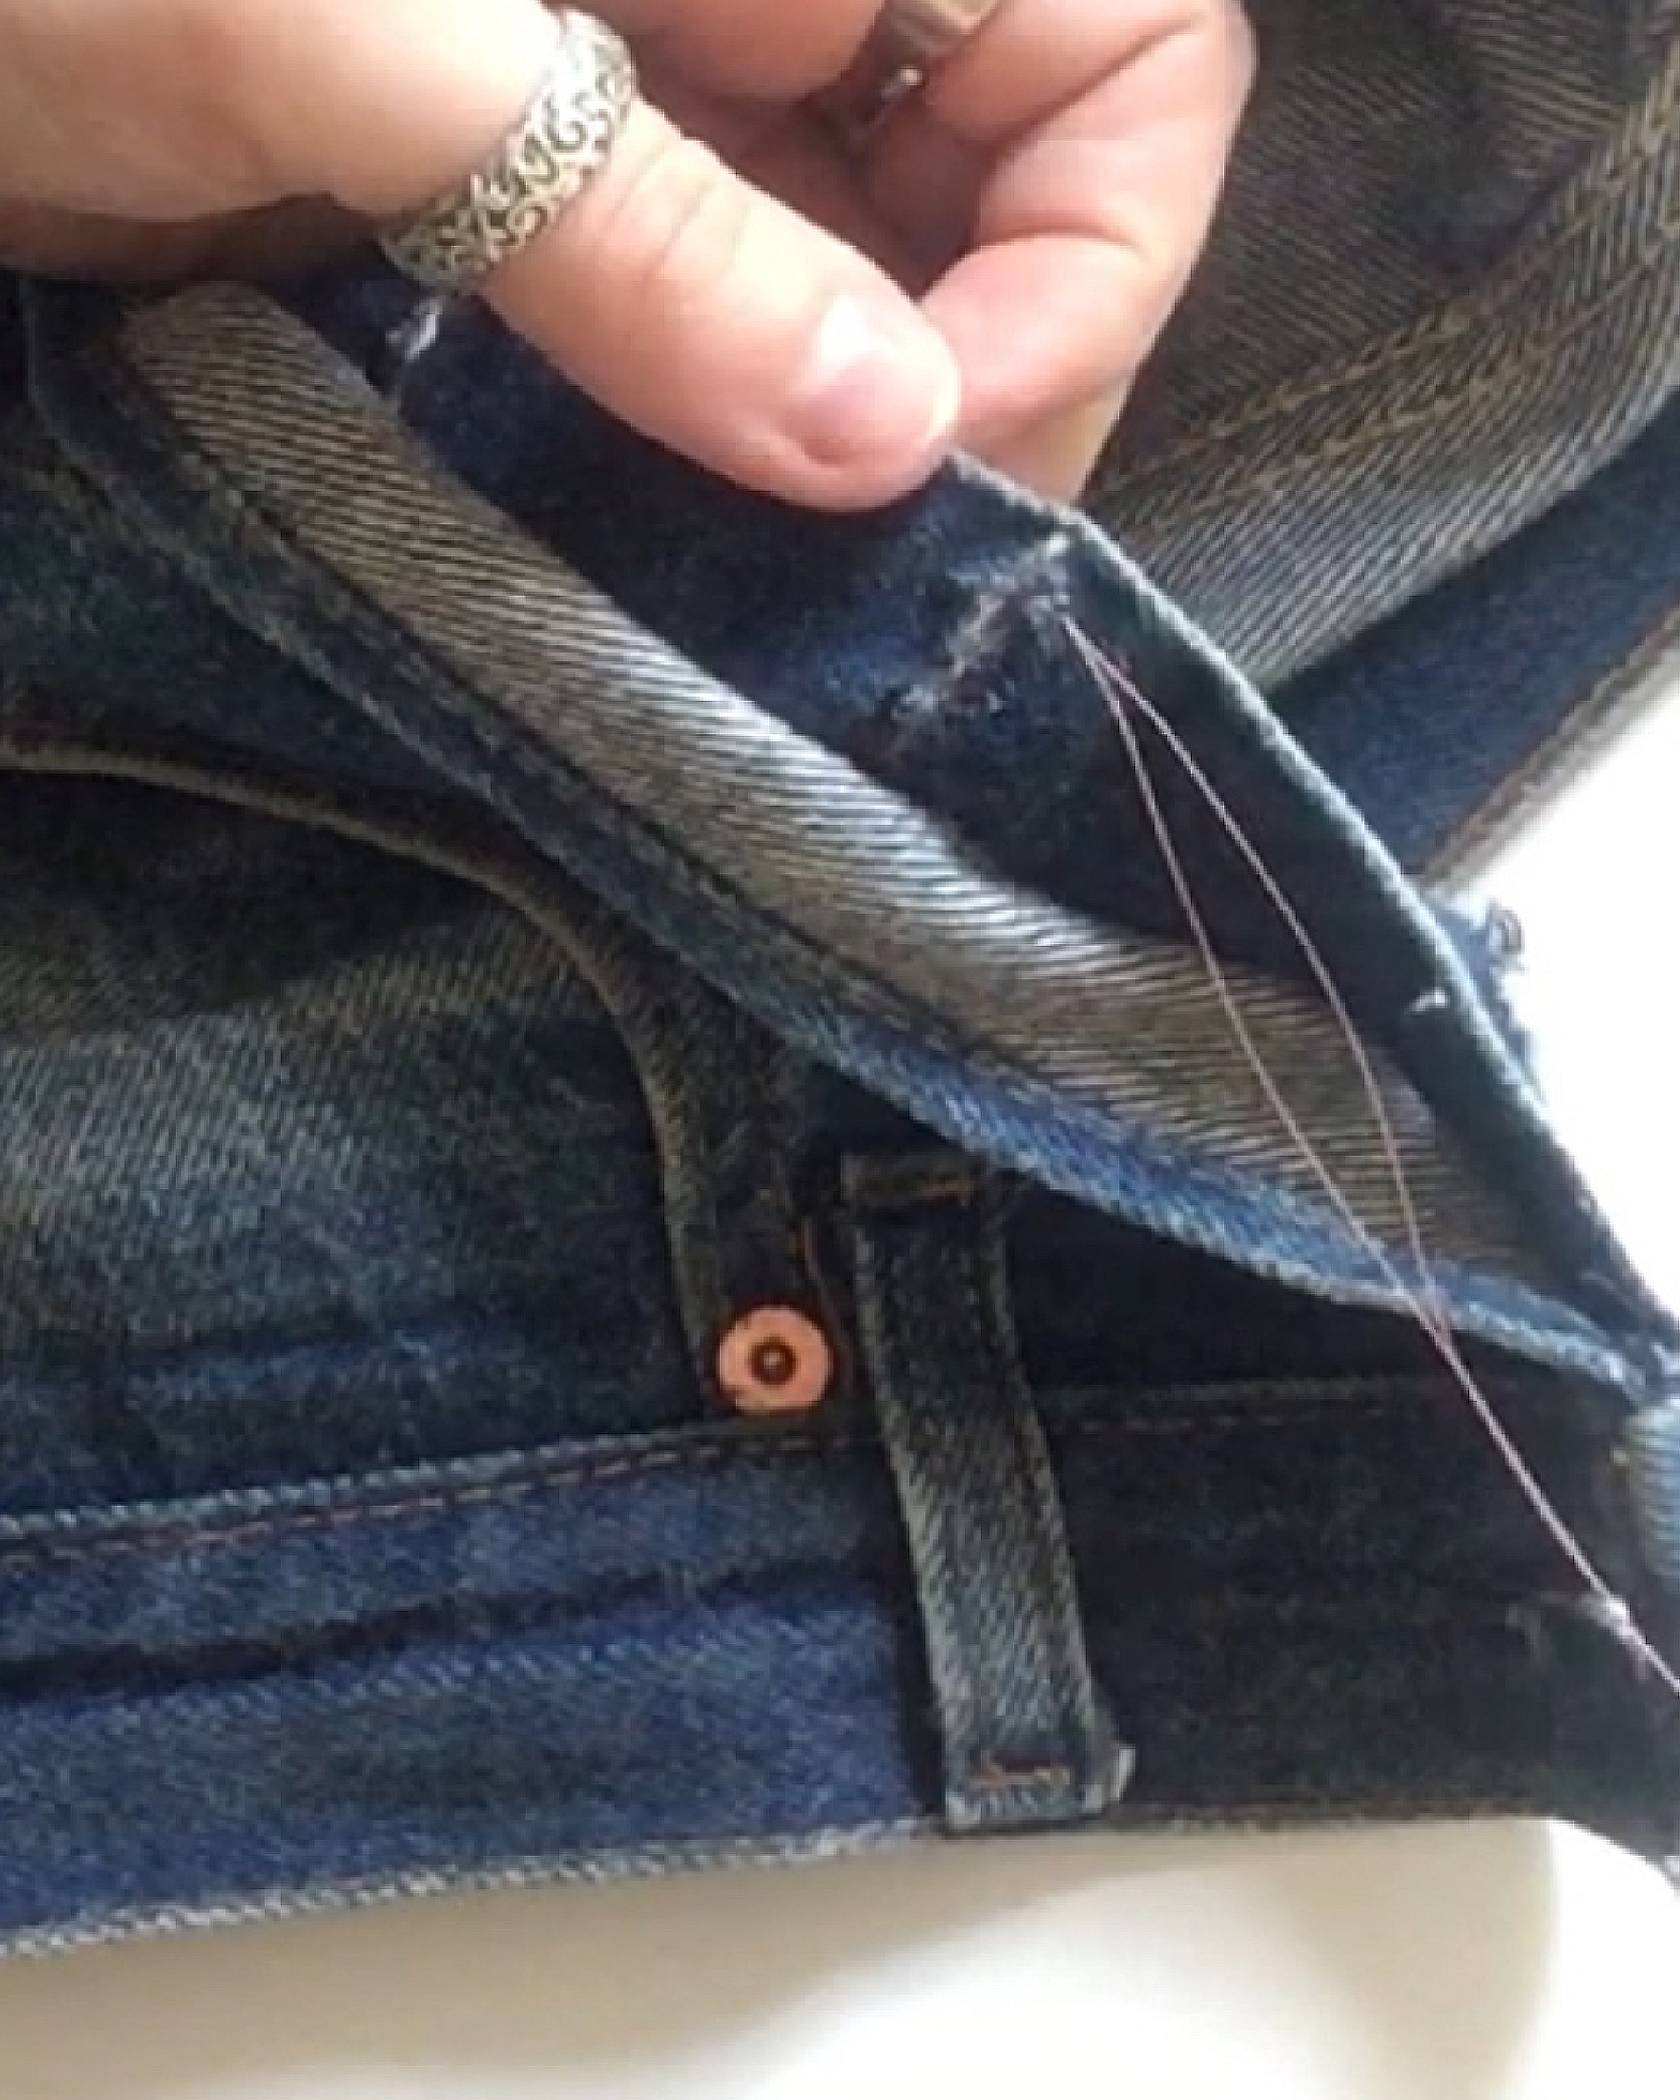 Image of secure a stitch's shape by looping several stitches around the hole where it was started on a pair of jeans.